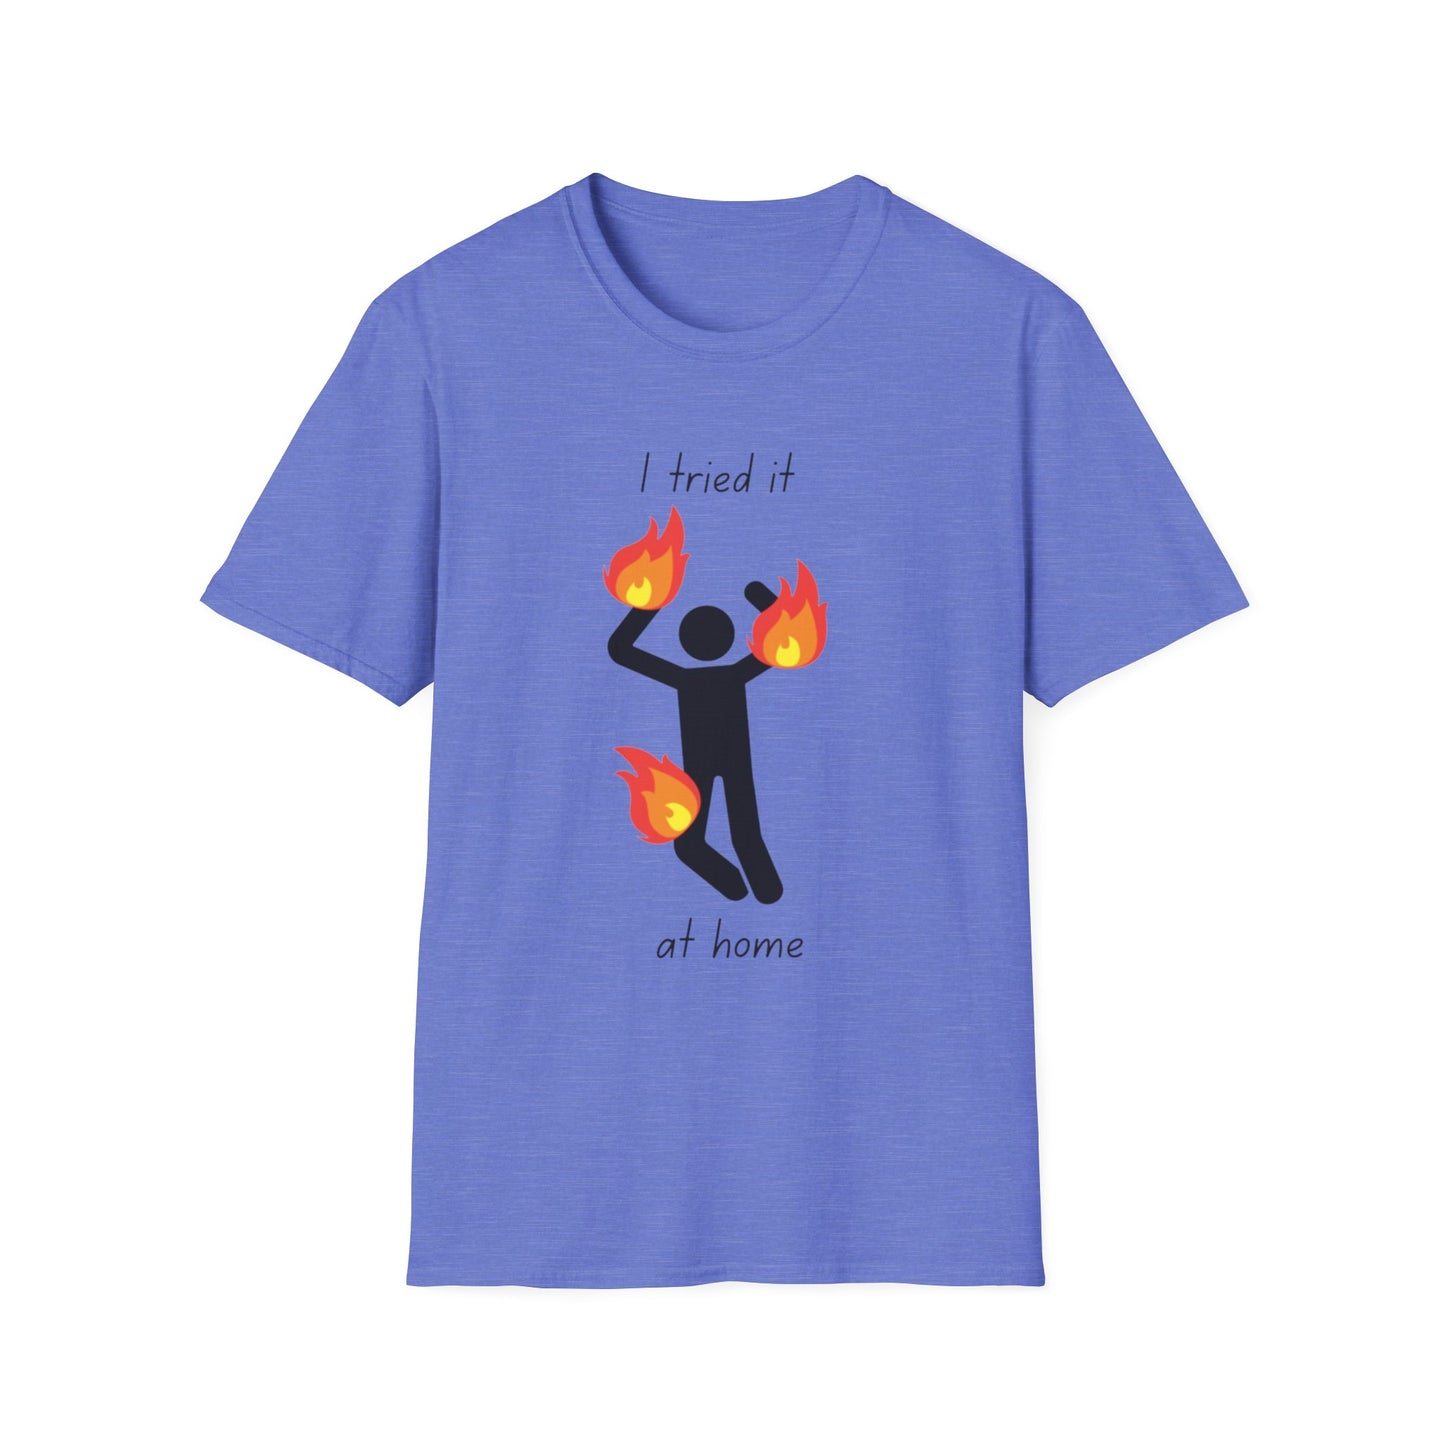 I Tried It at Home - Unisex Softstyle T-Shirt